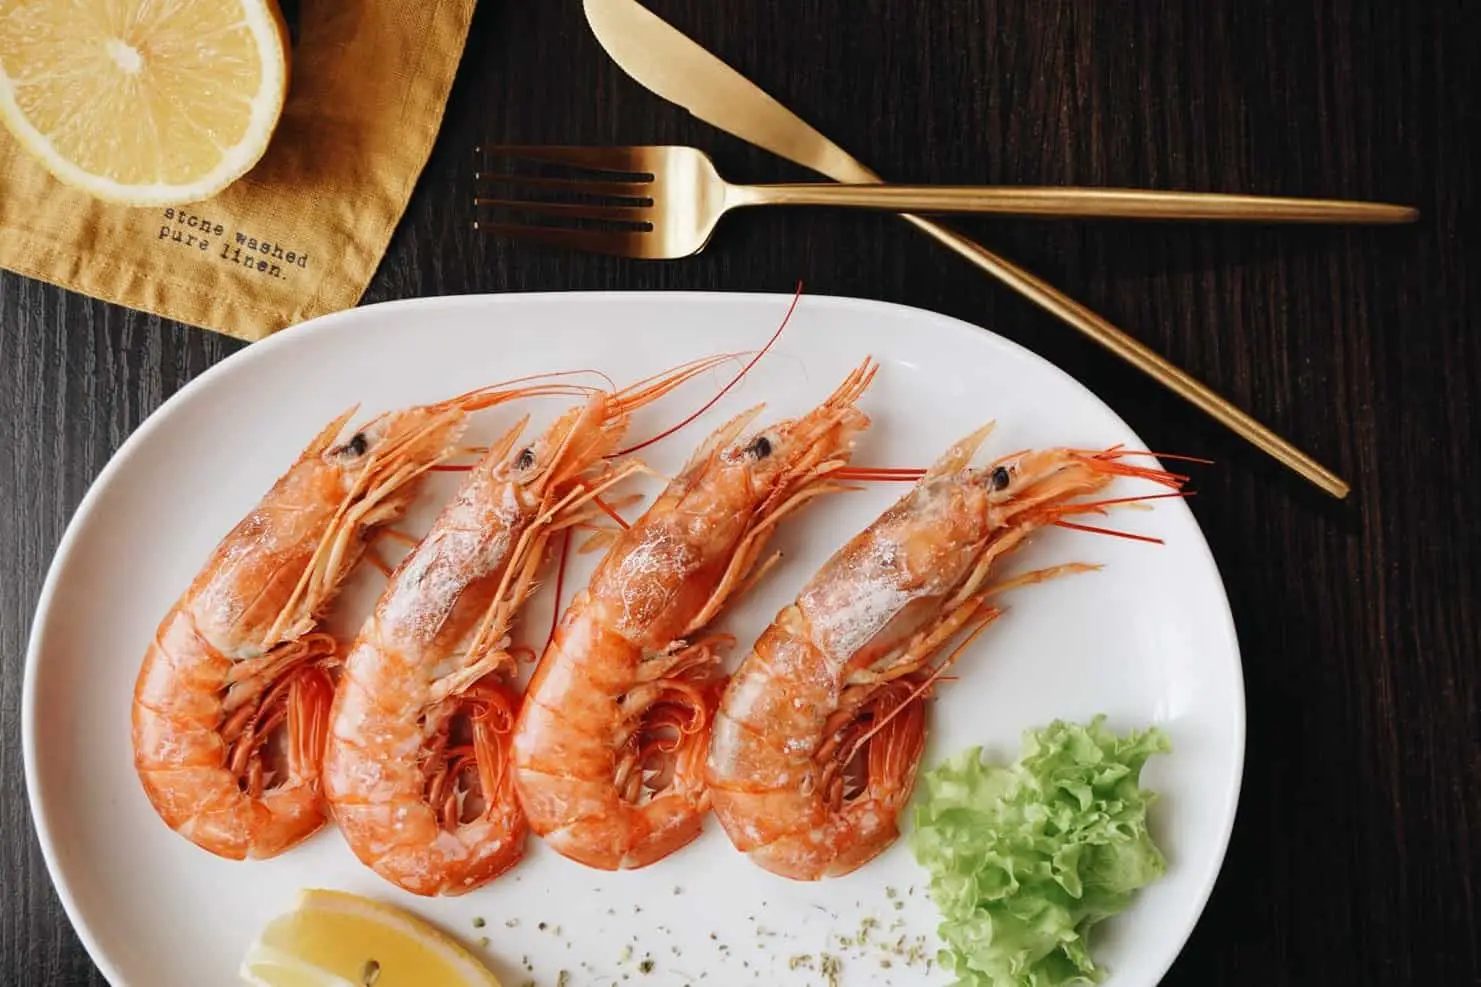 What Does Shrimp Taste Like? Yay or Nay? - ItsFoodtastic